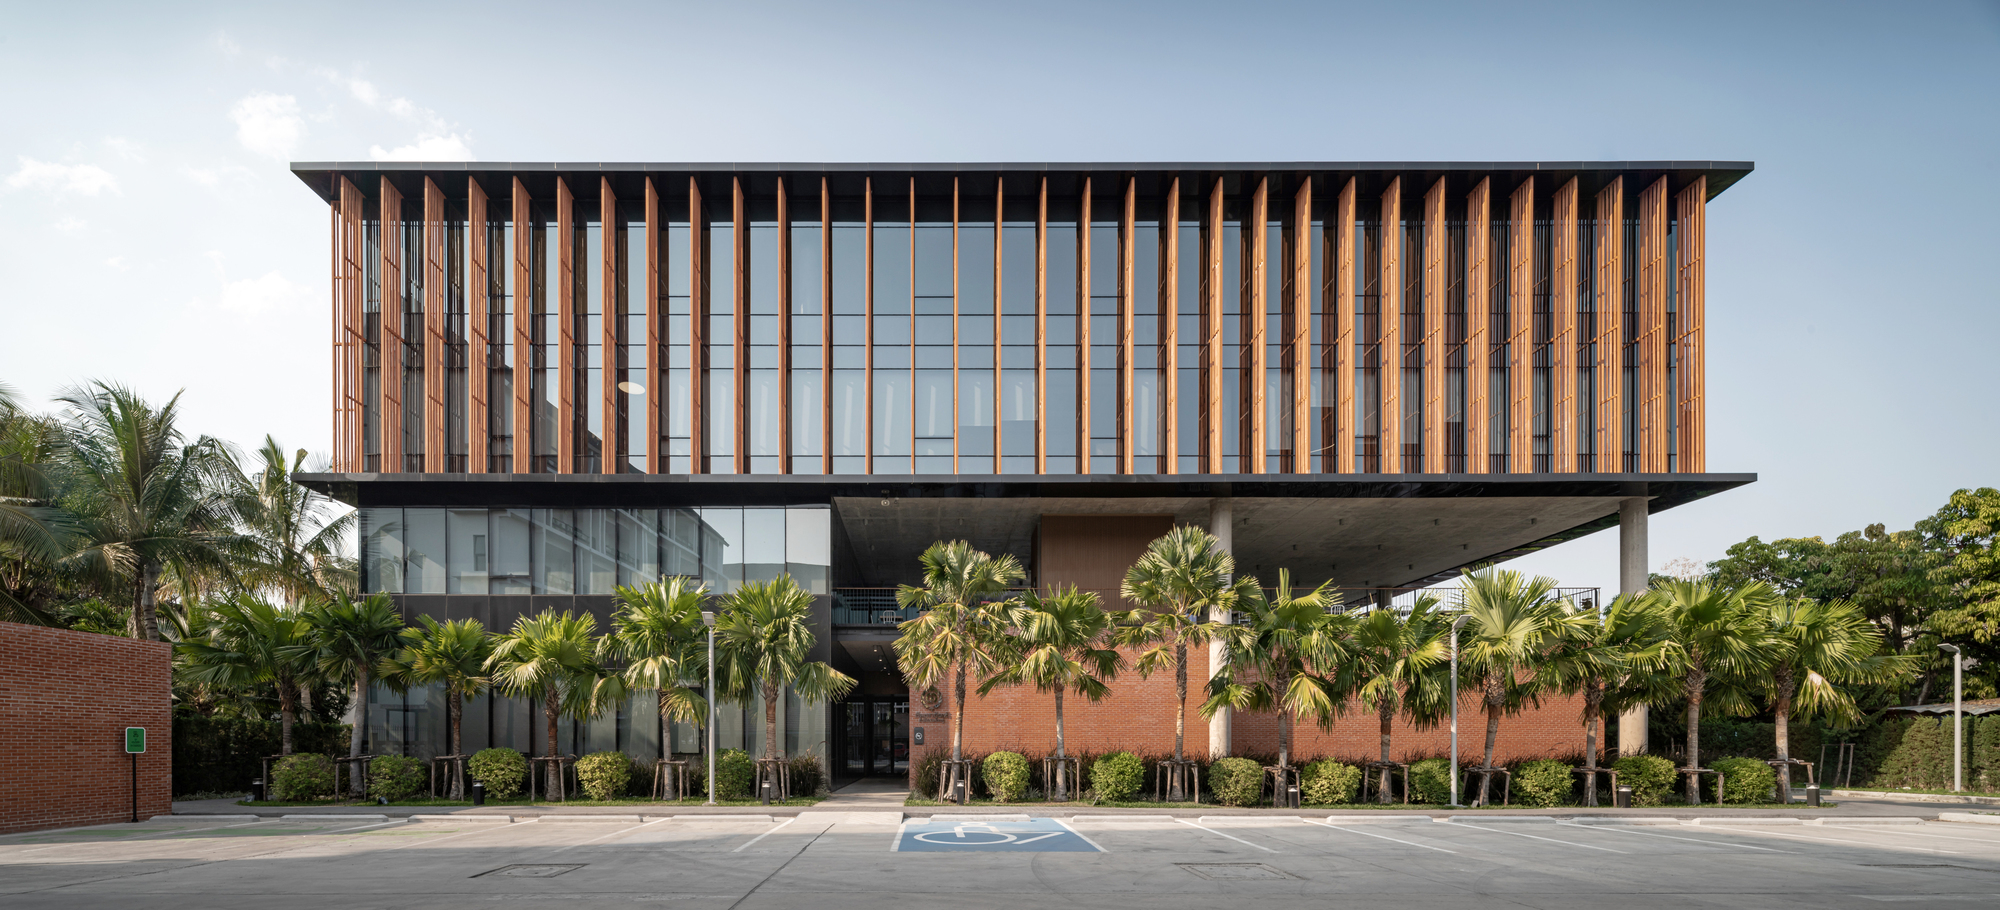 Choice Headquarters is surrounded by a wealth of culture like Thai architectural elements